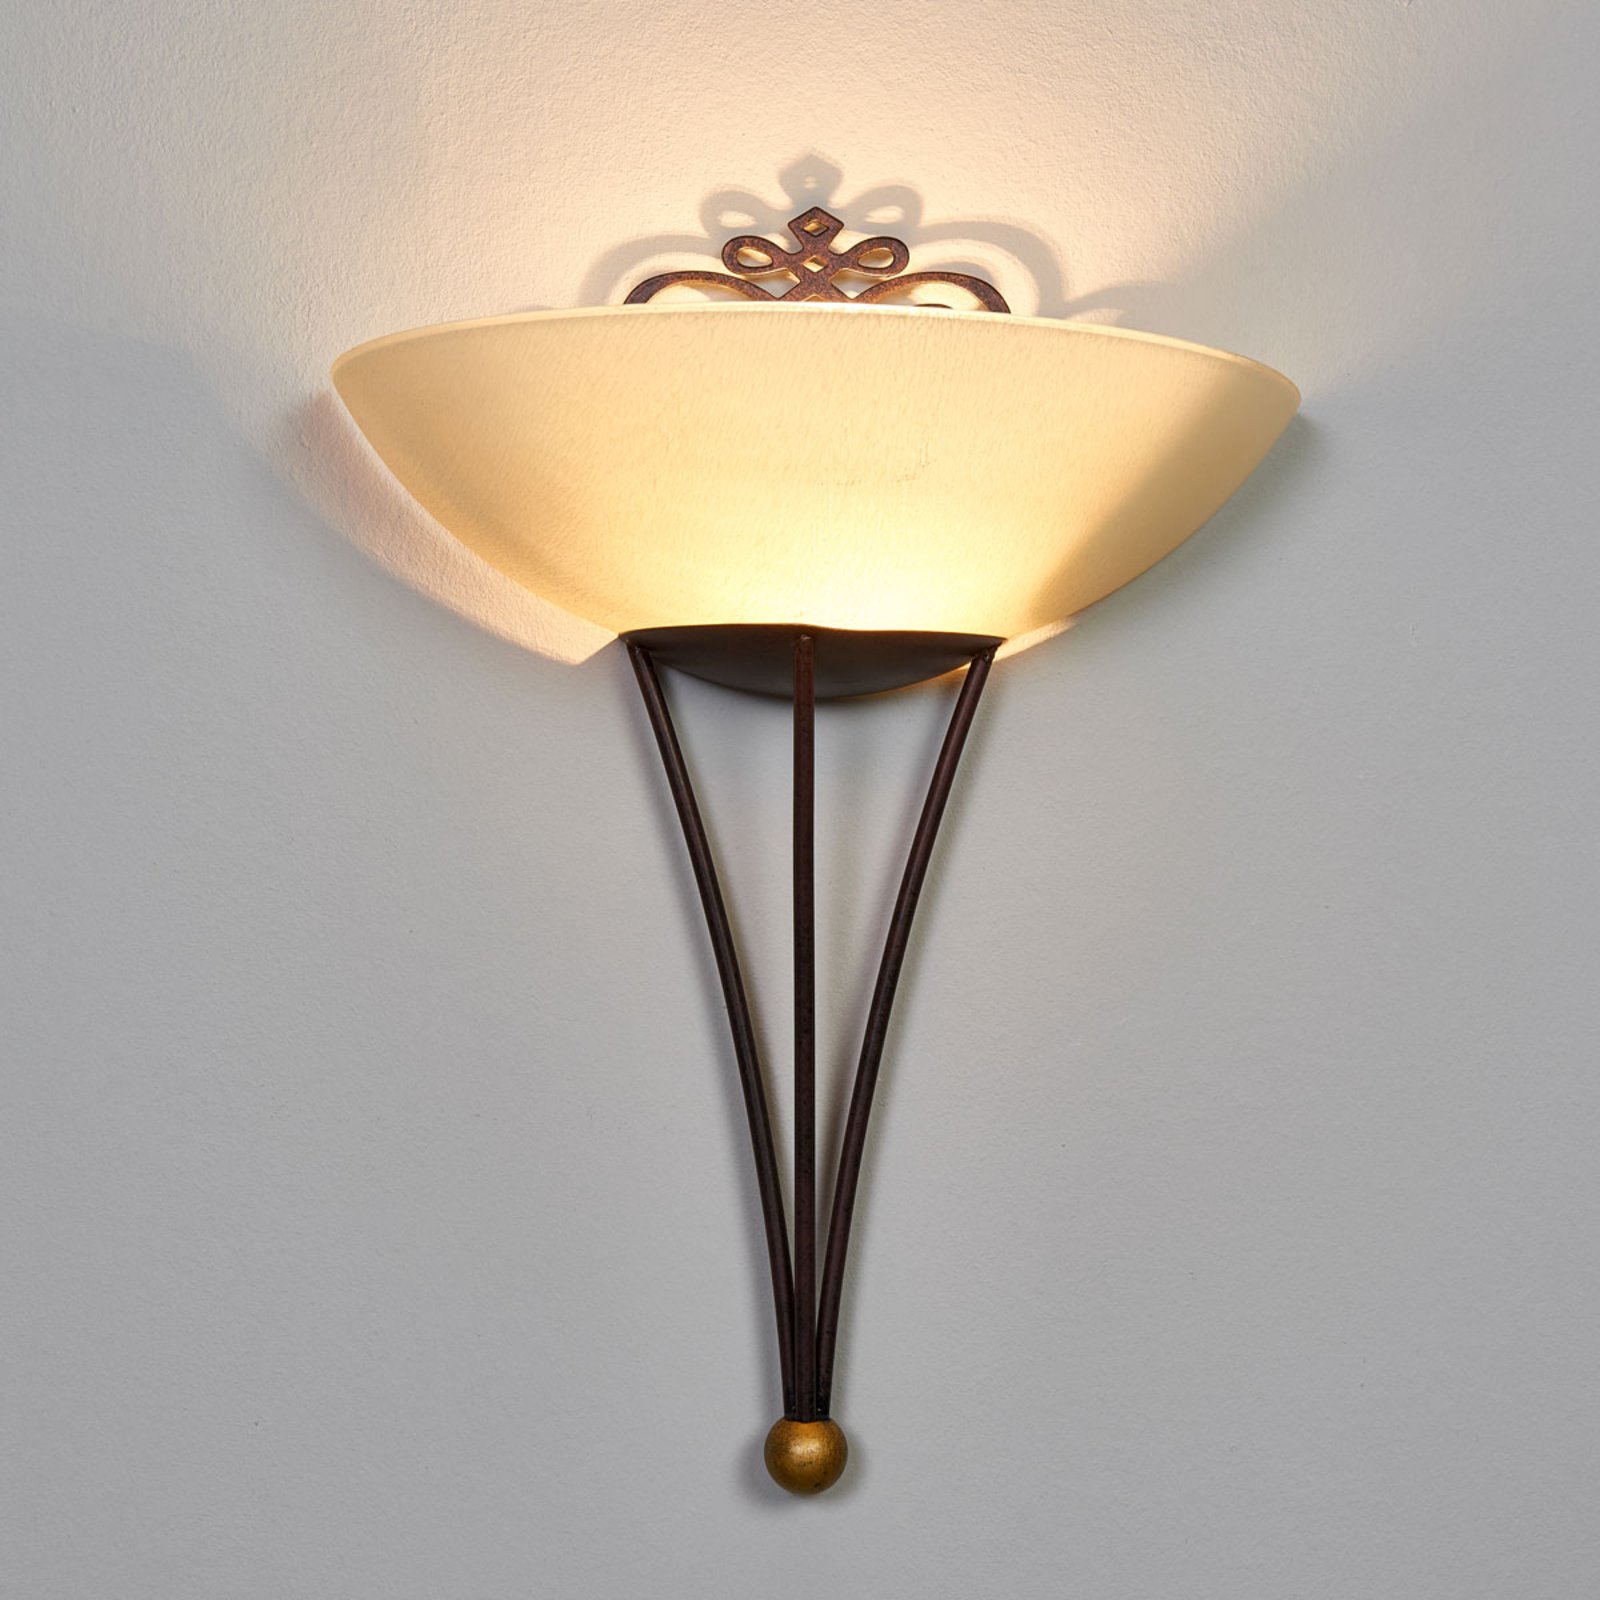 Decorative wall light Master with decoration